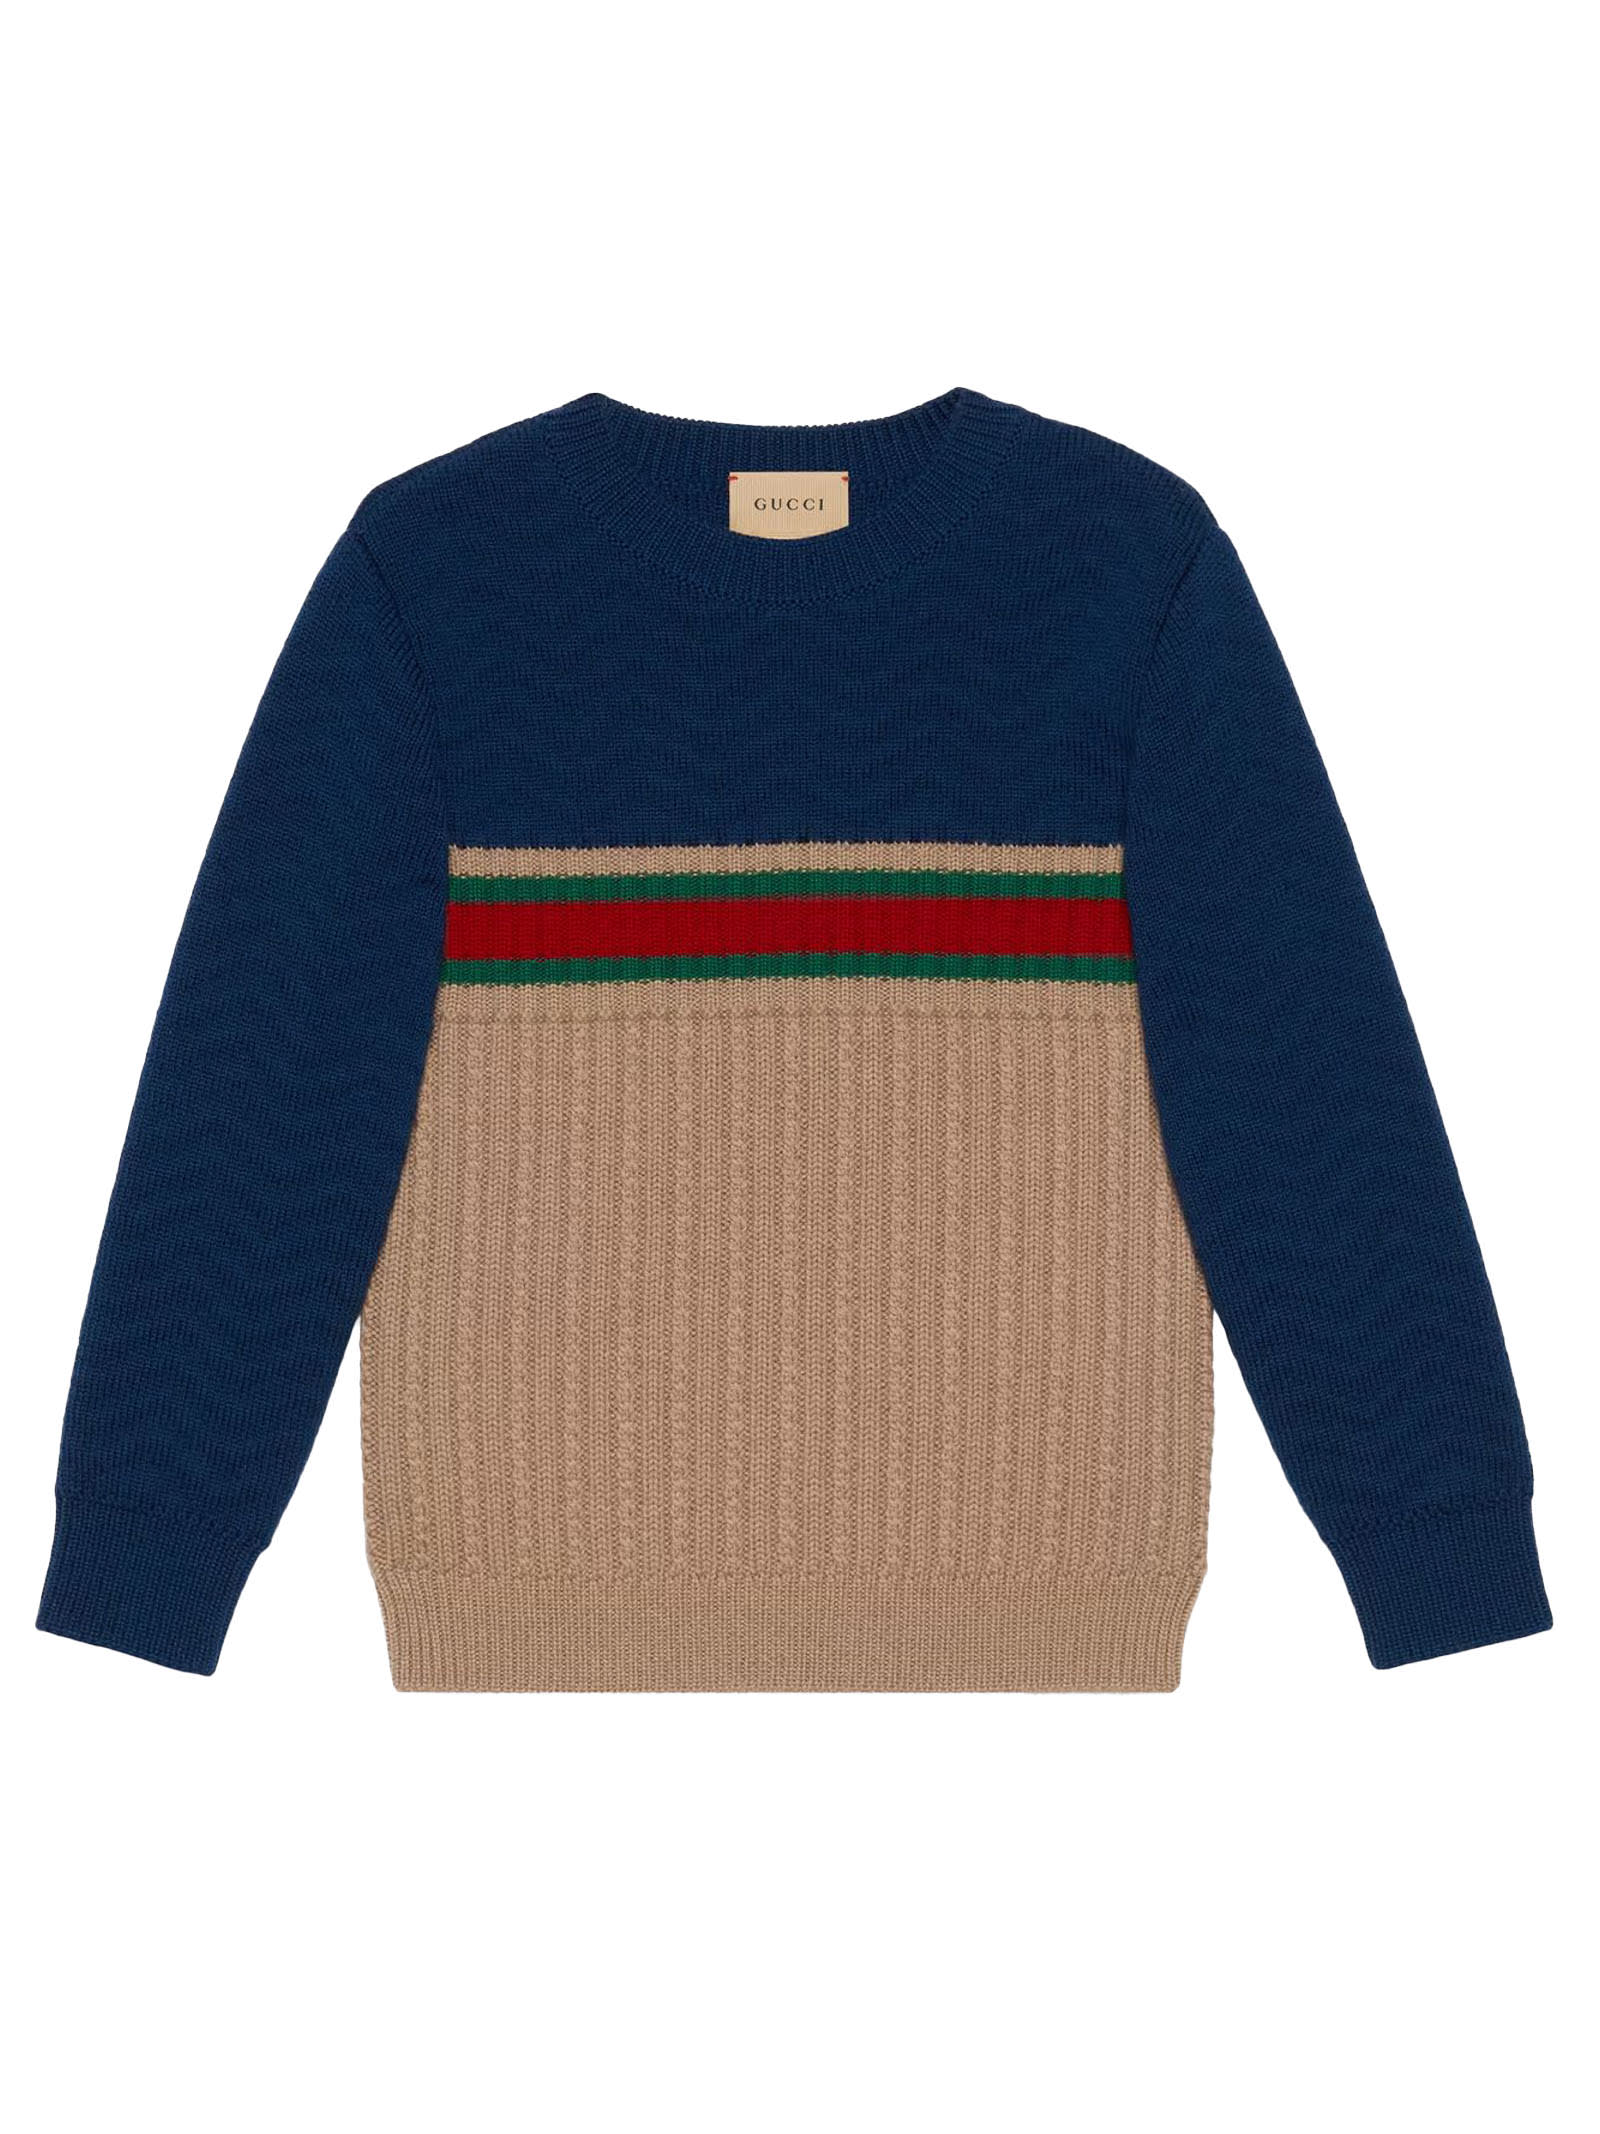 GUCCI CHILDRENS WOOL SWEATER WITH WEB